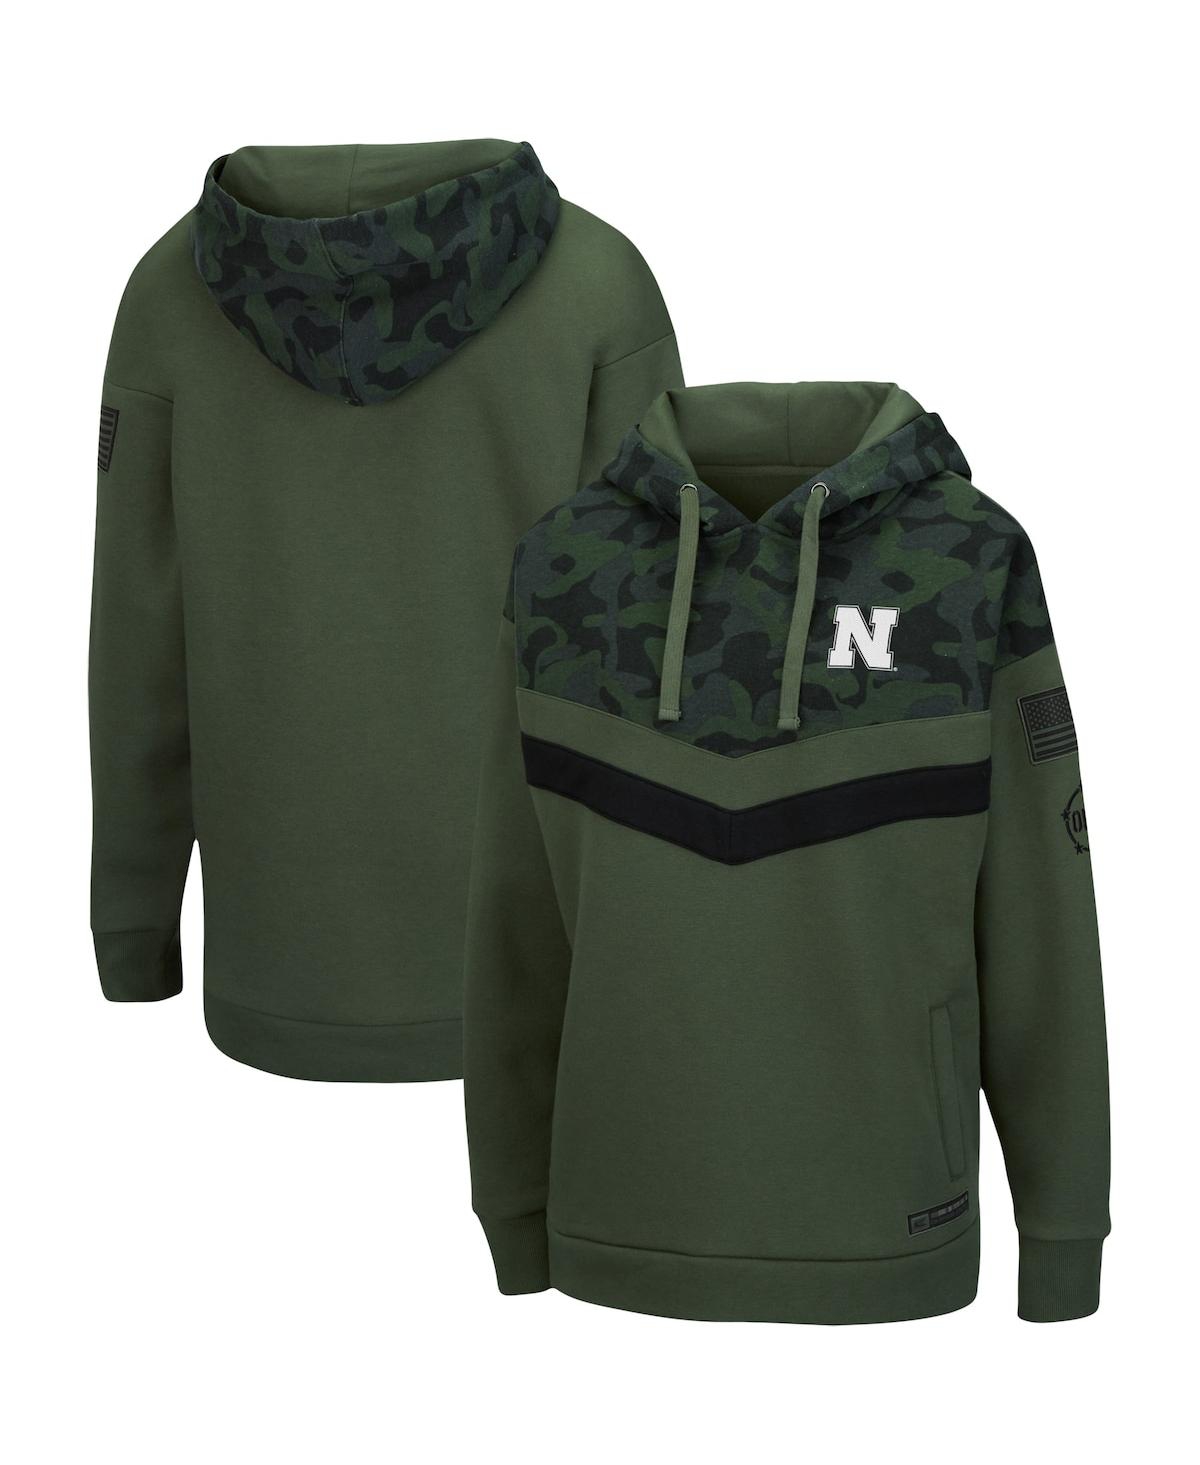 Women's Colosseum Olive, Camo Nebraska Huskers Oht Military-Inspired Appreciation Extraction Chevron Pullover Hoodie - Olive, Camo